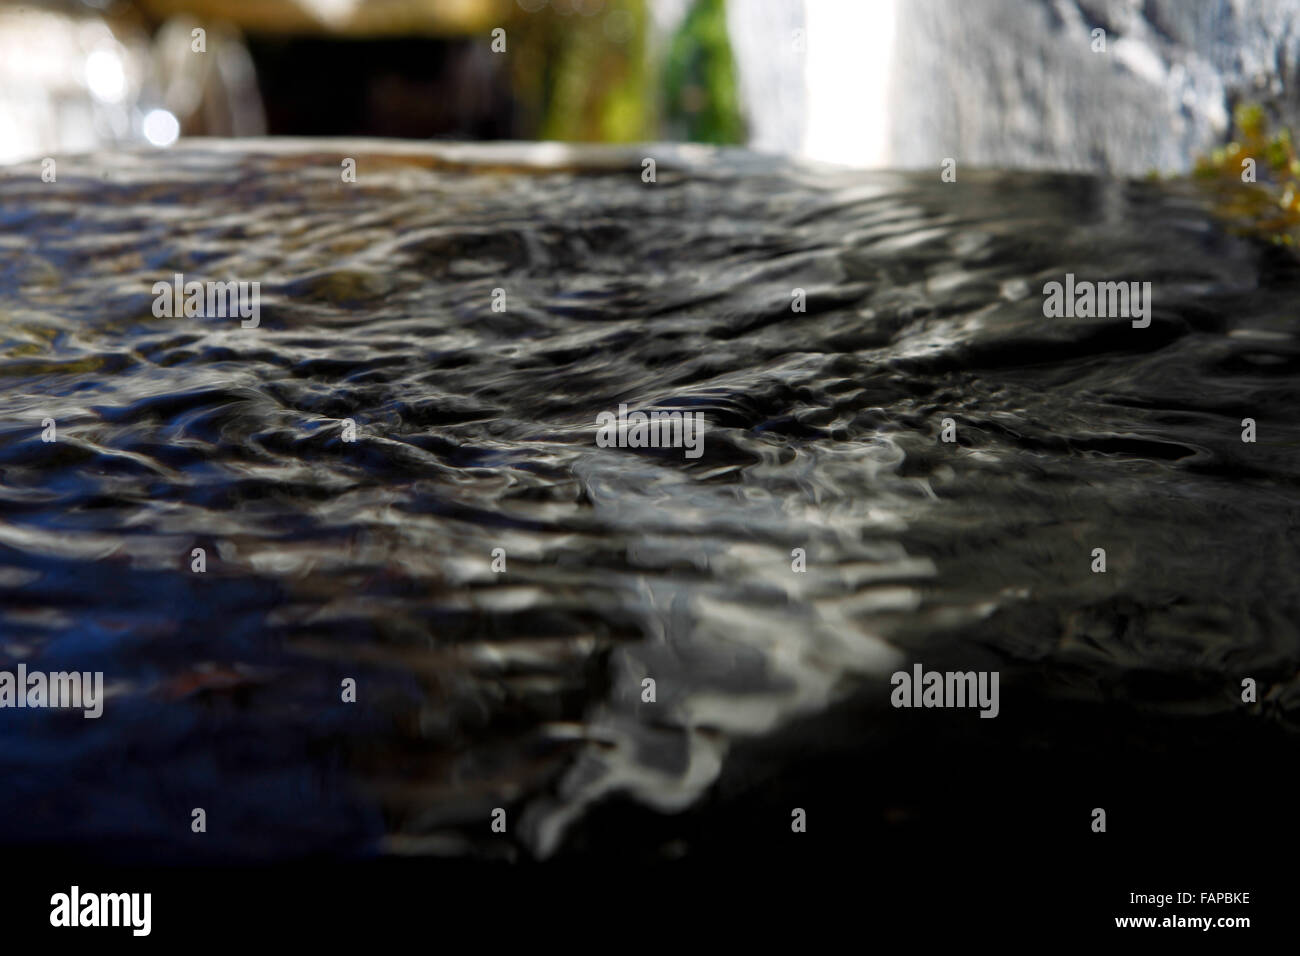 Volvic Natural Mineral Water Stock Photo - Alamy